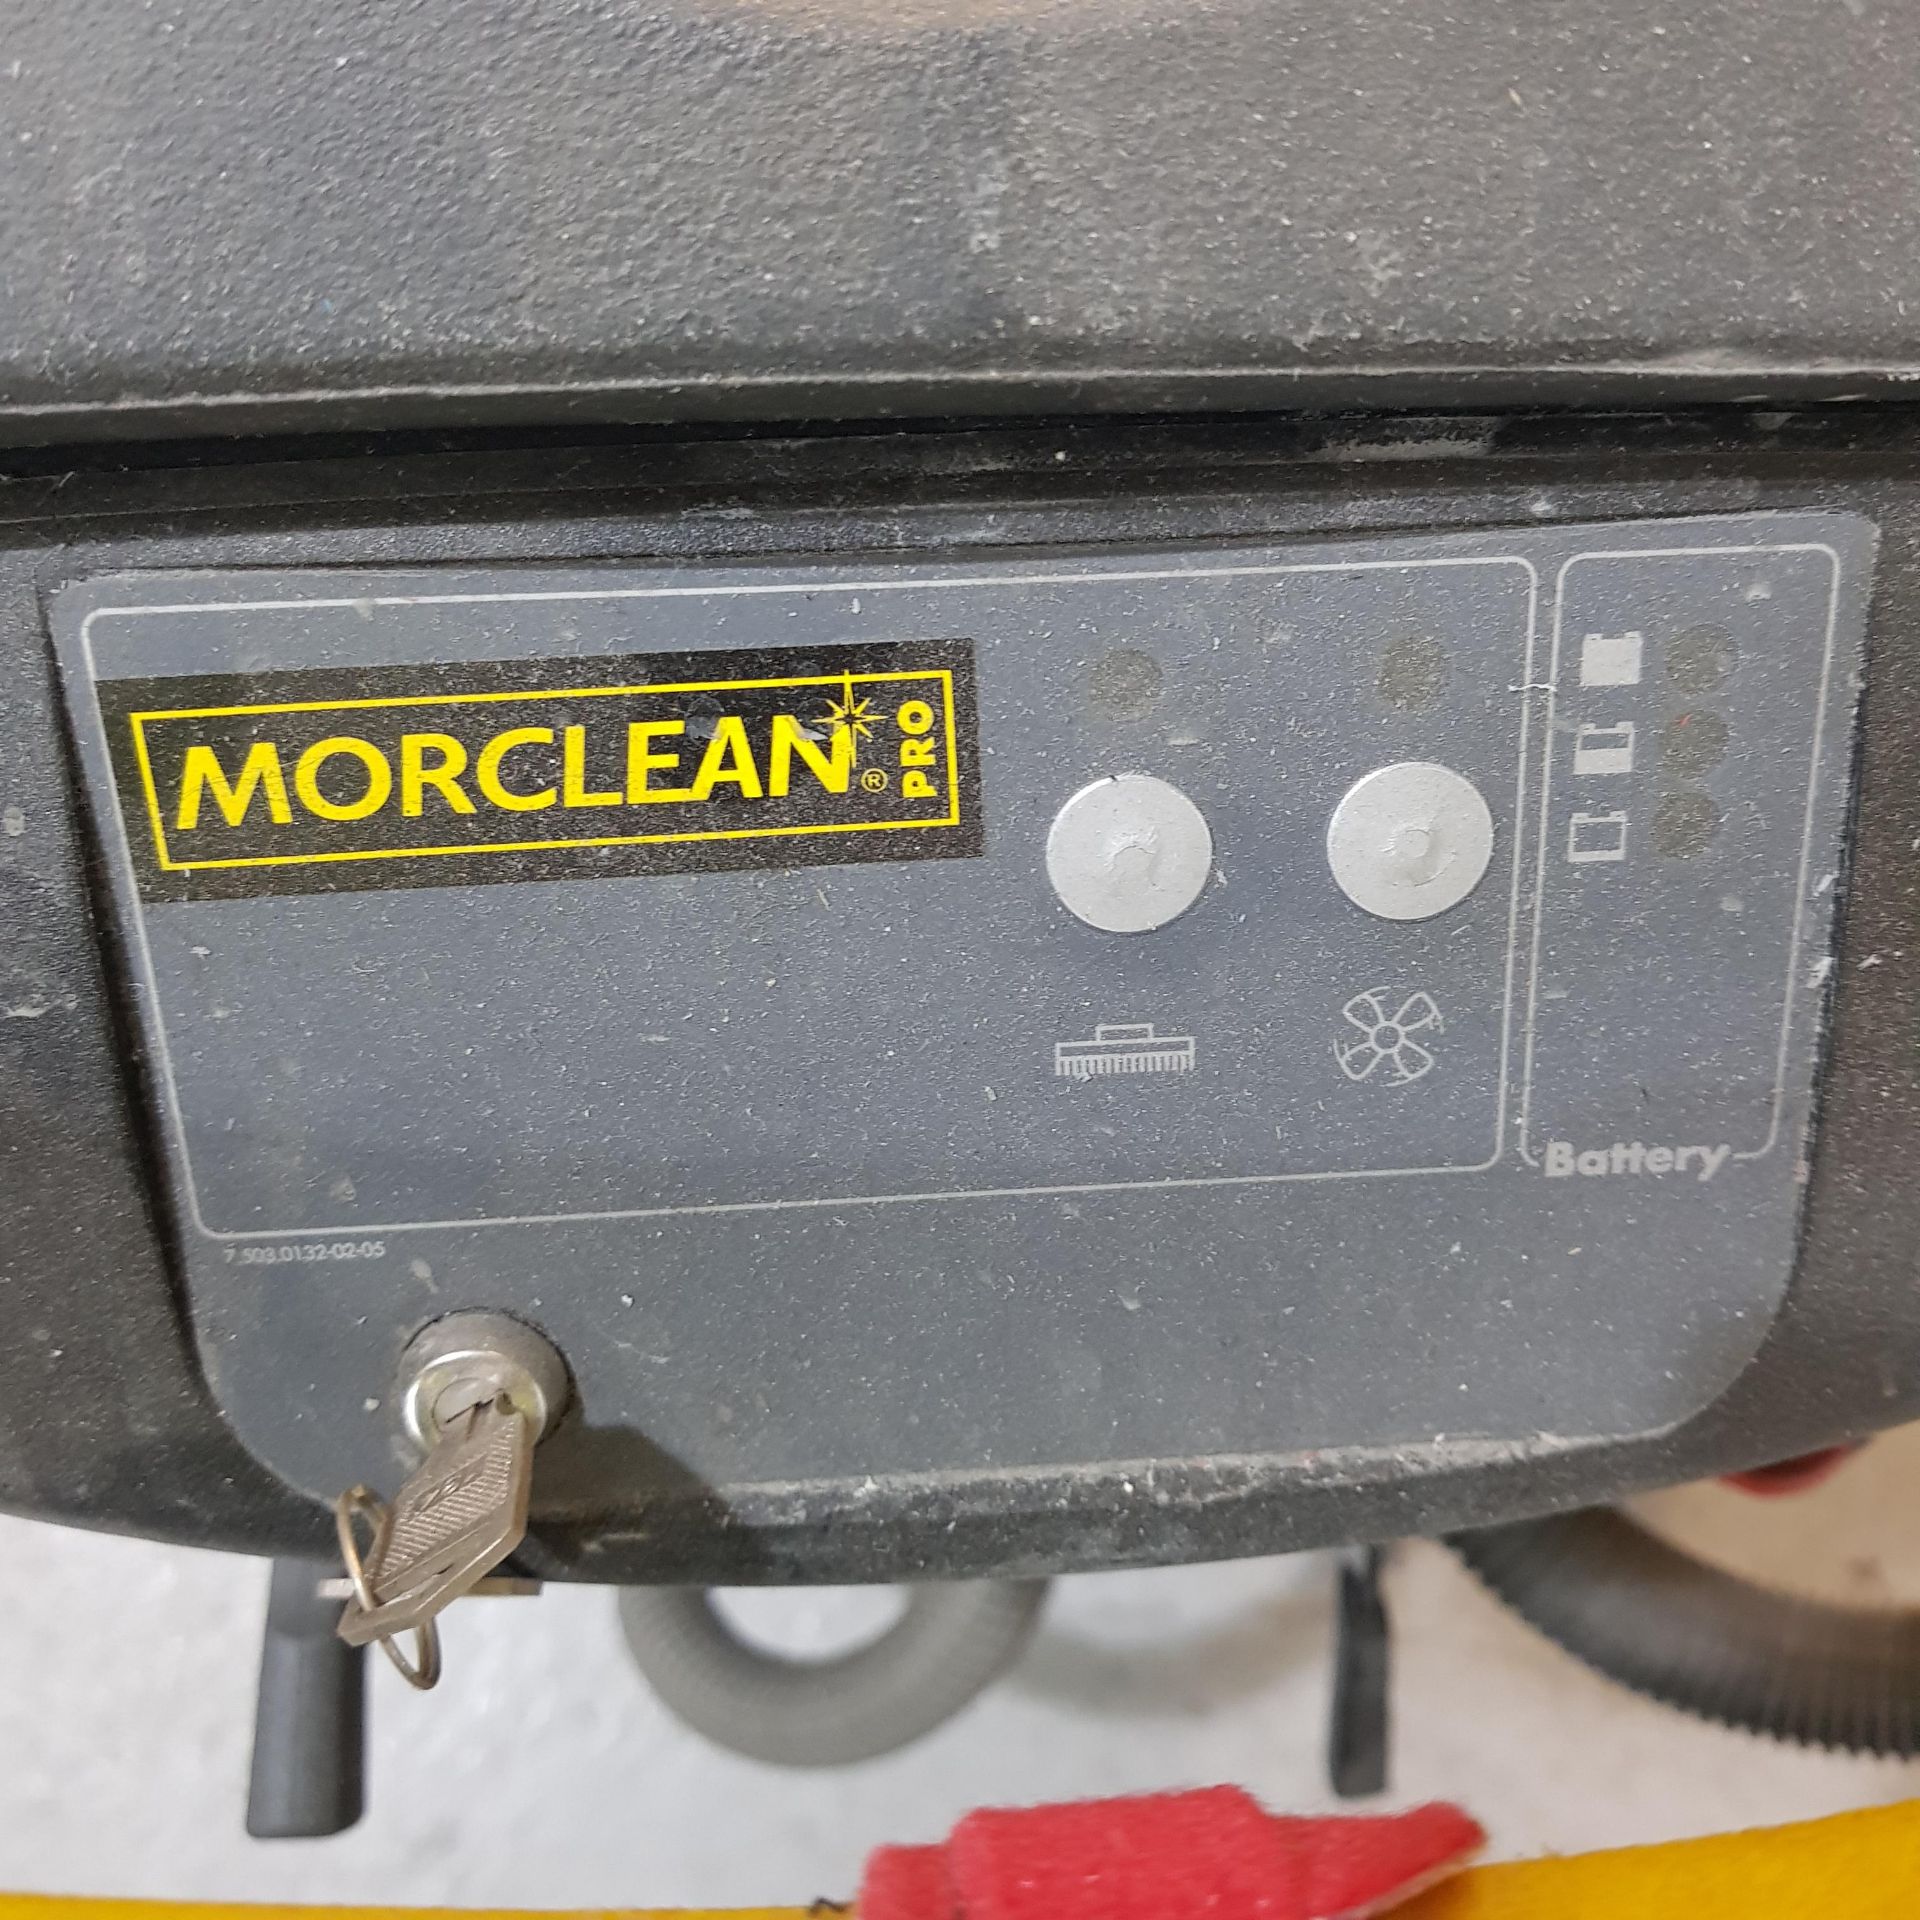 MORCLEAN COMMERCIAL FLOOR SCRUBBER/24V (ASSETS LOCATED IN DENTON, MANCHESTER. VIEWING STRICTLY BY - Image 4 of 5